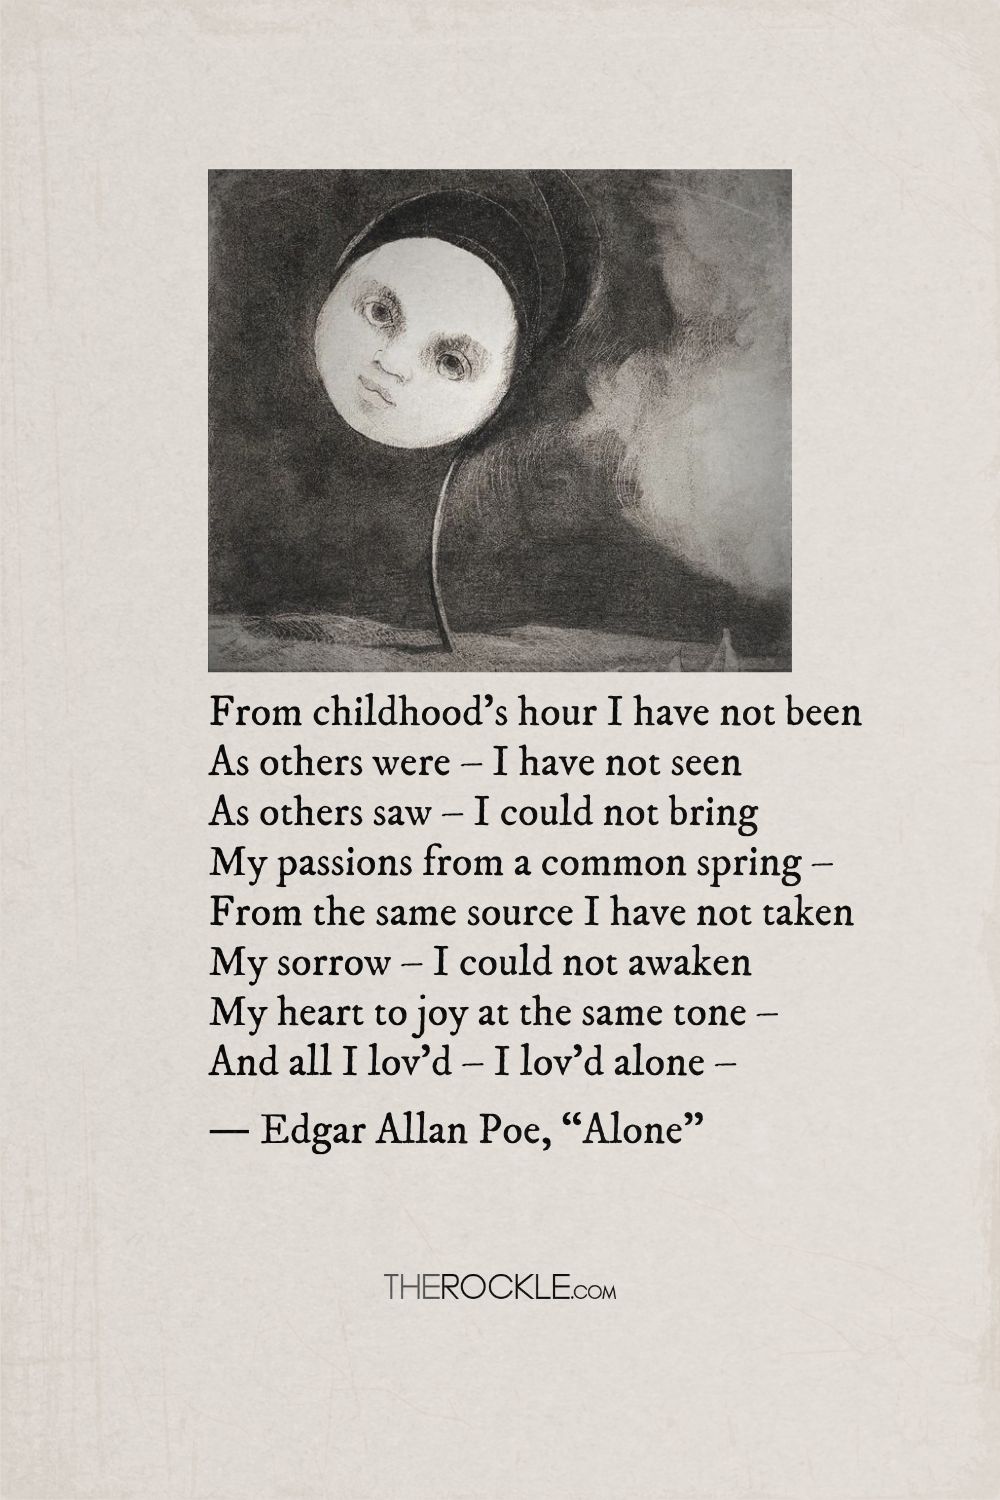 Edgar Allan Poe's quote from the poem Alone